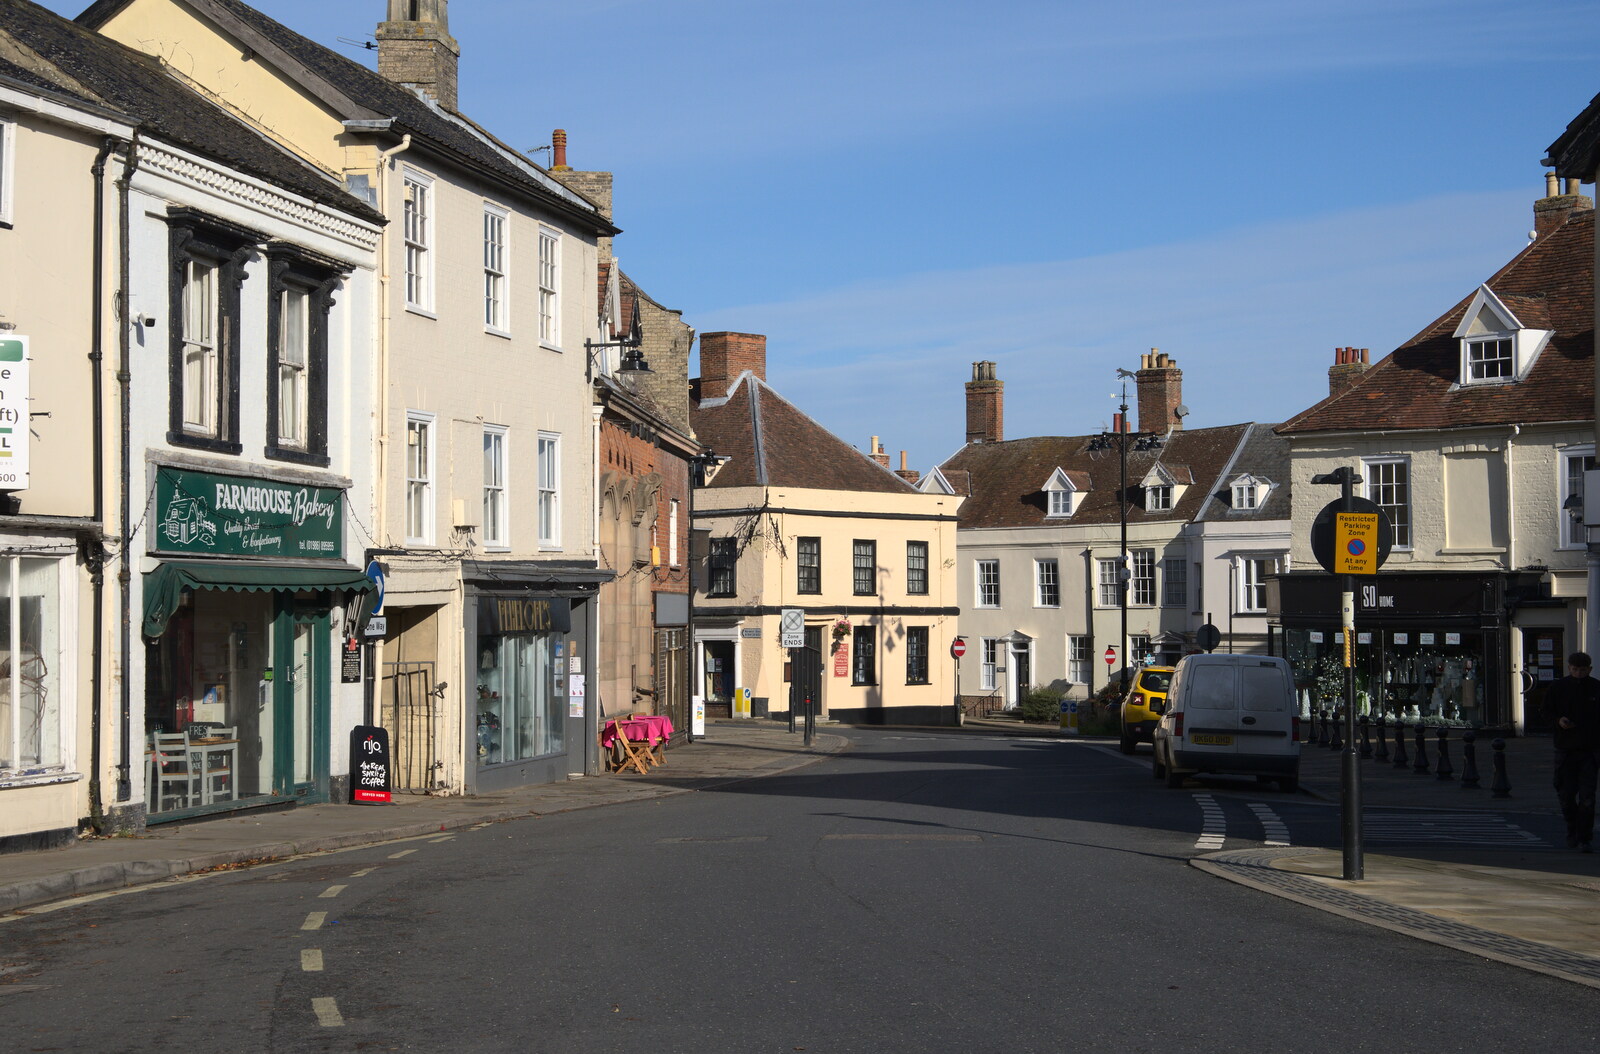 A Postcard from Bungay, Suffolk - 2nd November 2022: Looking up St. Mary's Street